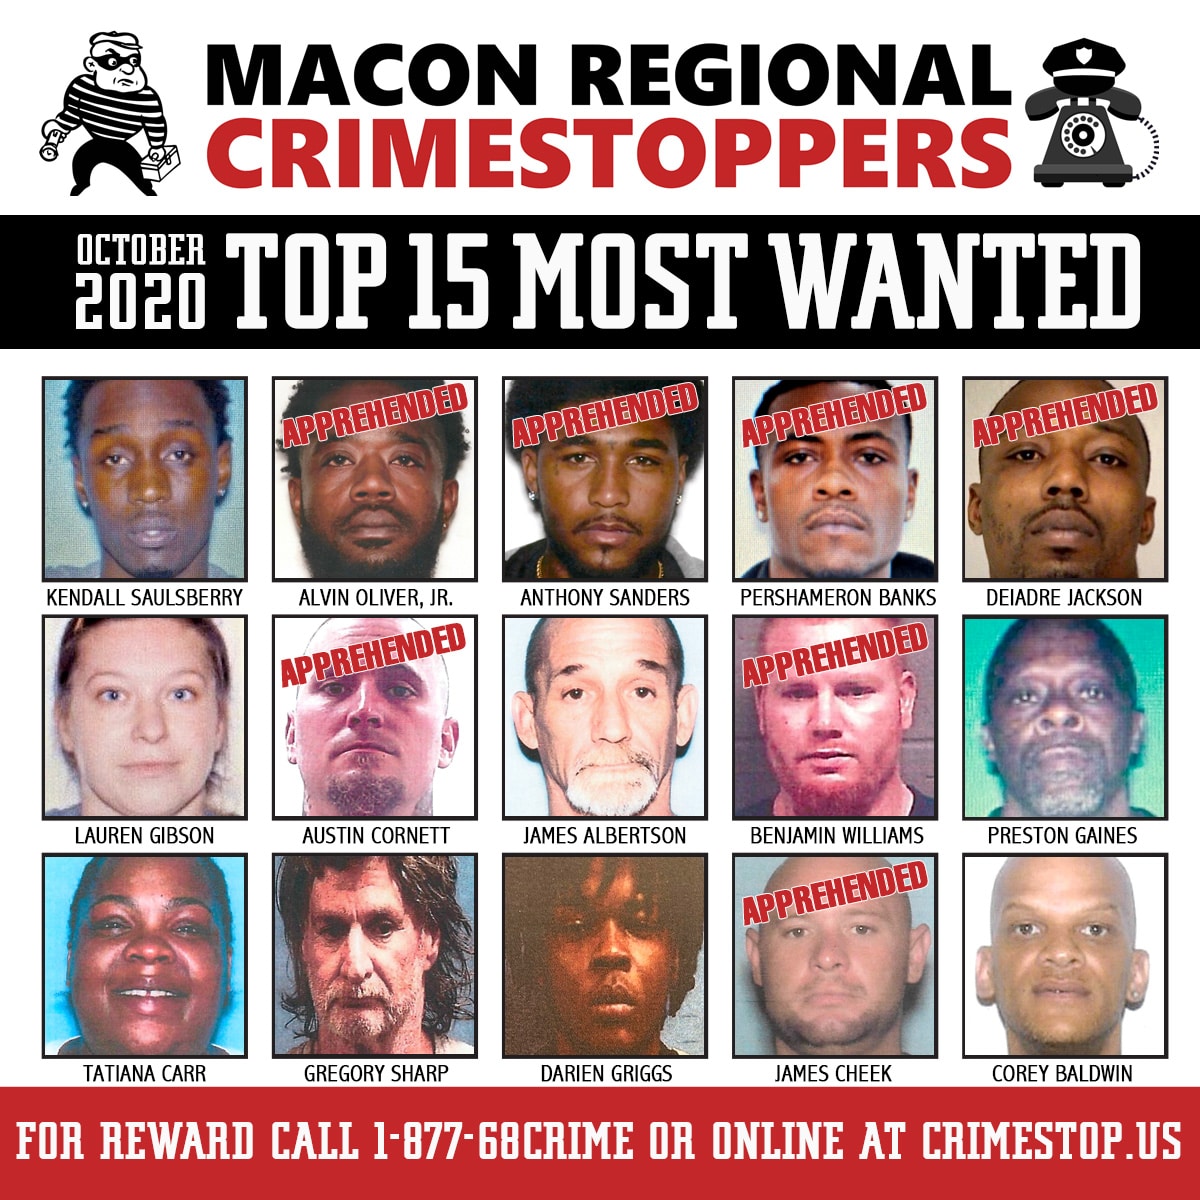 TOP 15 MOST WANTED OCTOBER 2020